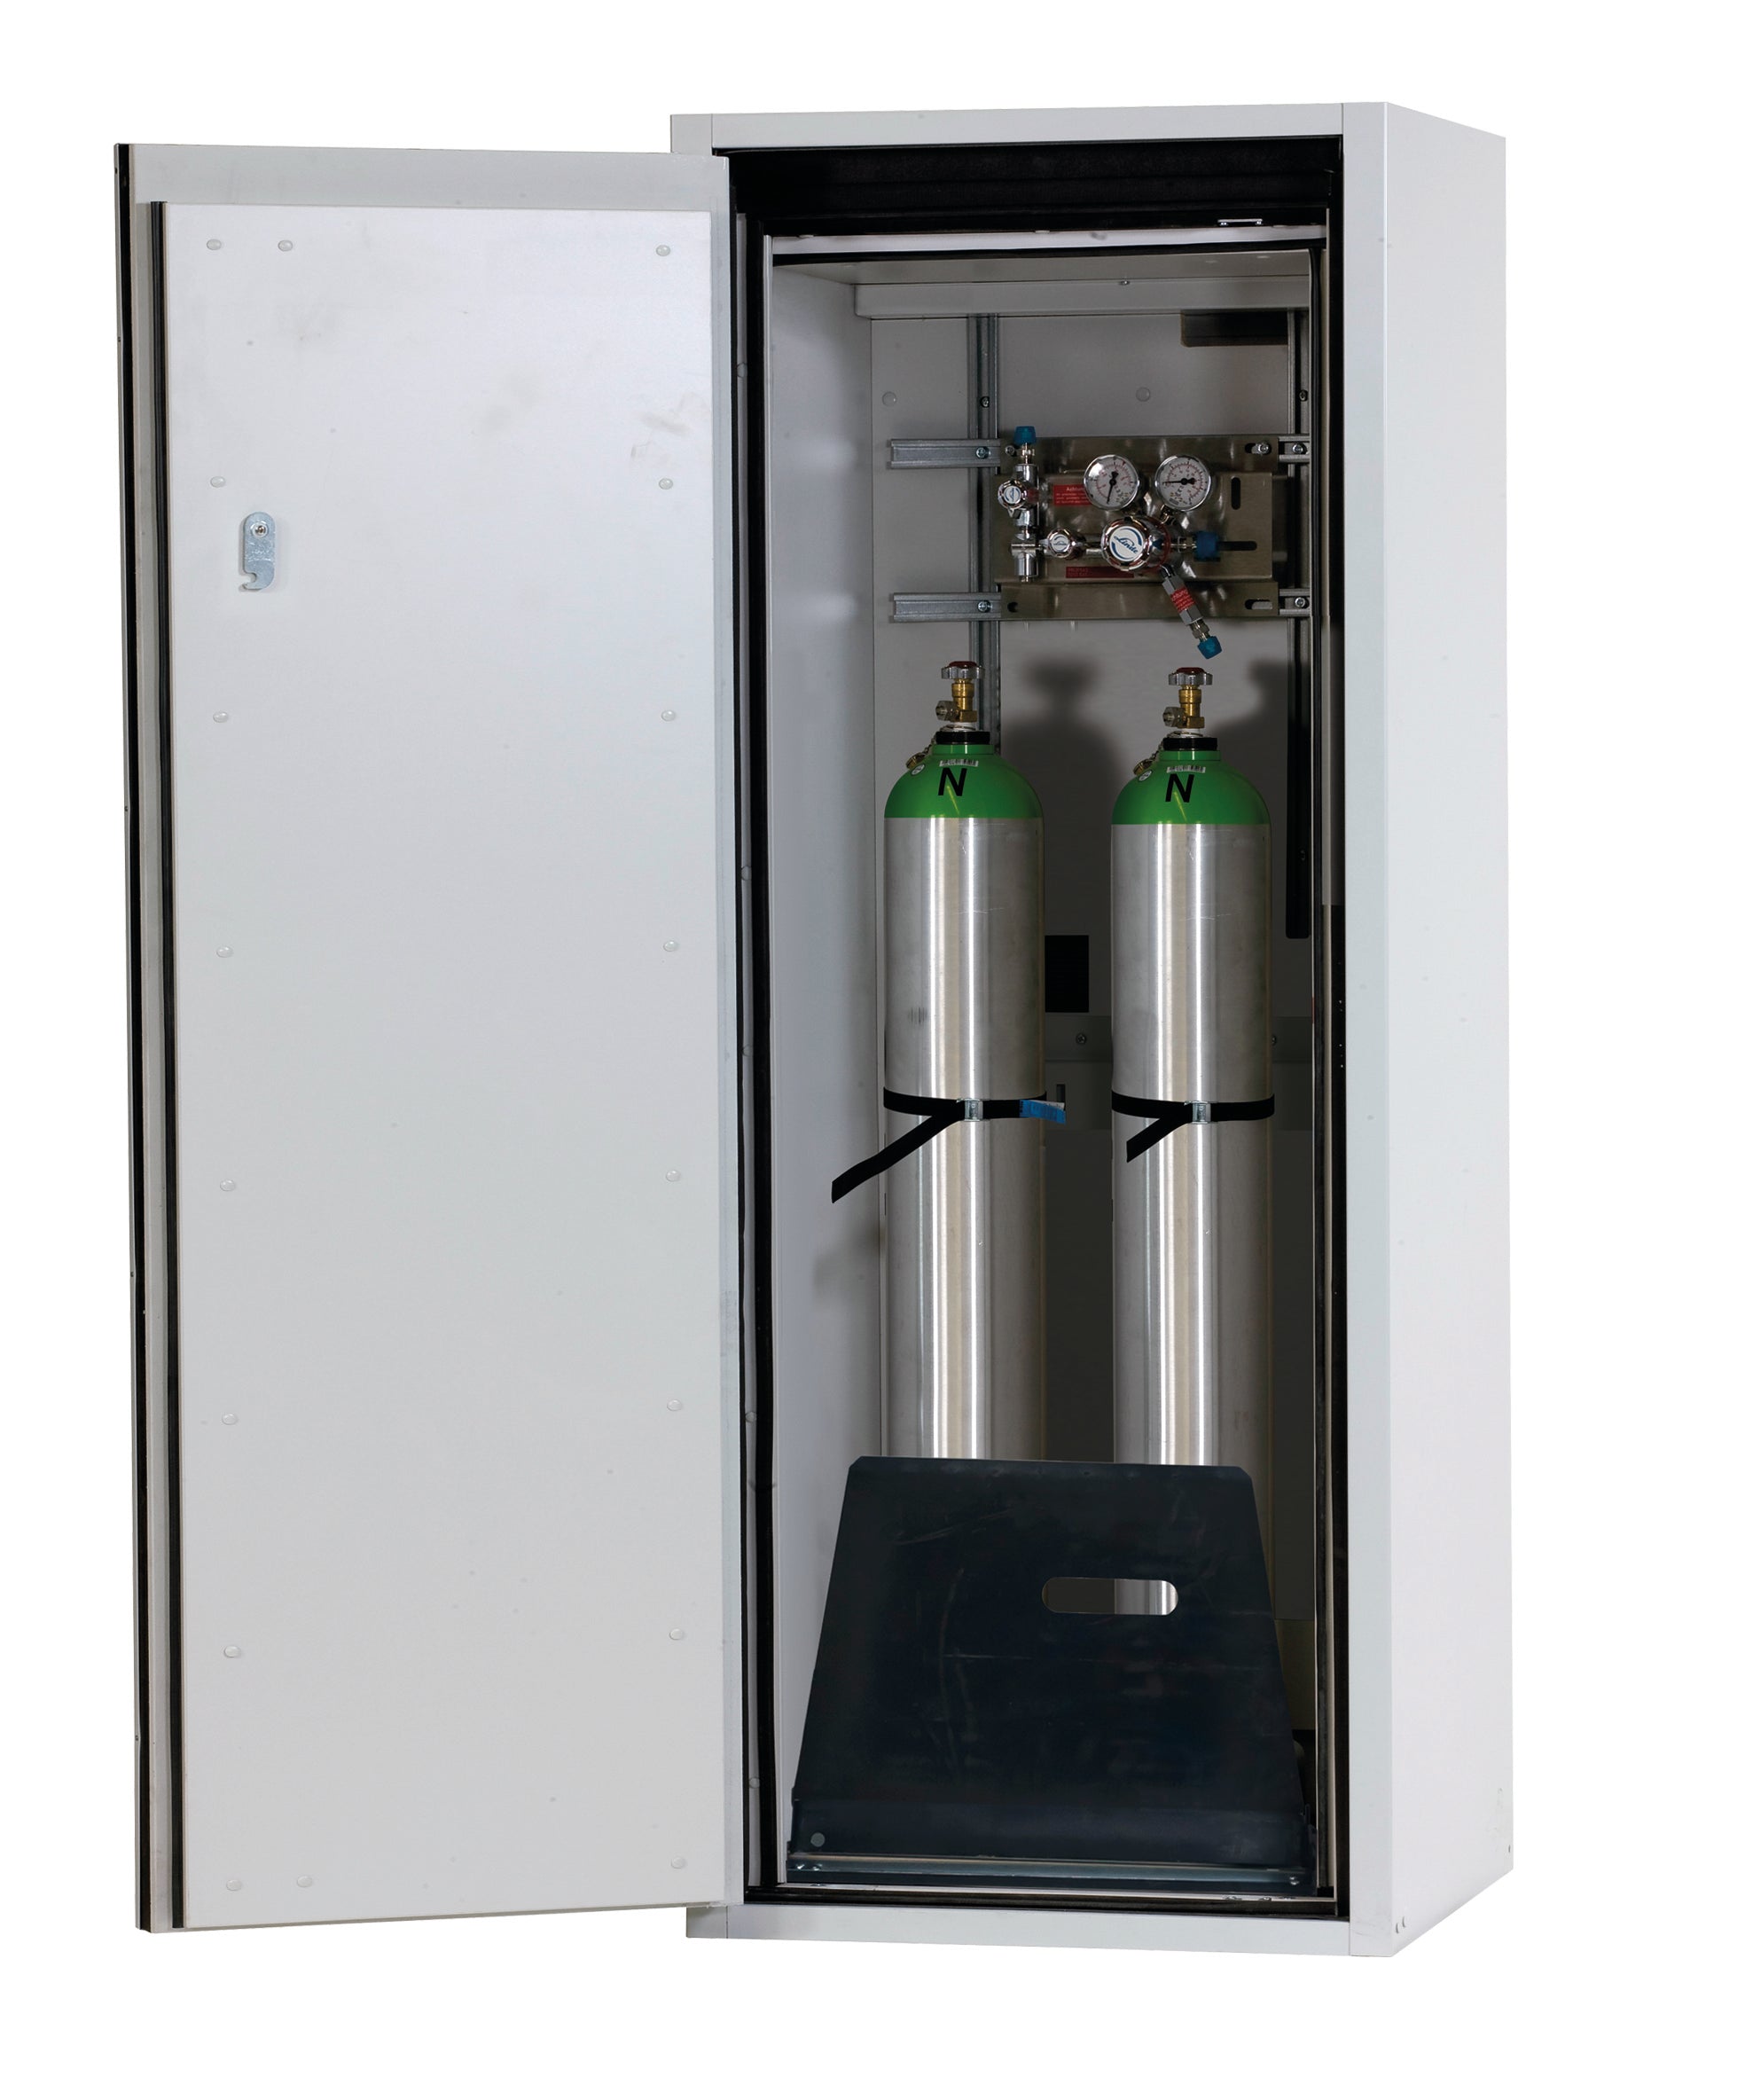 Type 90 compressed gas bottle cabinet G-ULTIMATE-90 model G90.145.060 in light gray RAL 7035 with standard interior fittings for 2x compressed gas bottles of 10 liters each